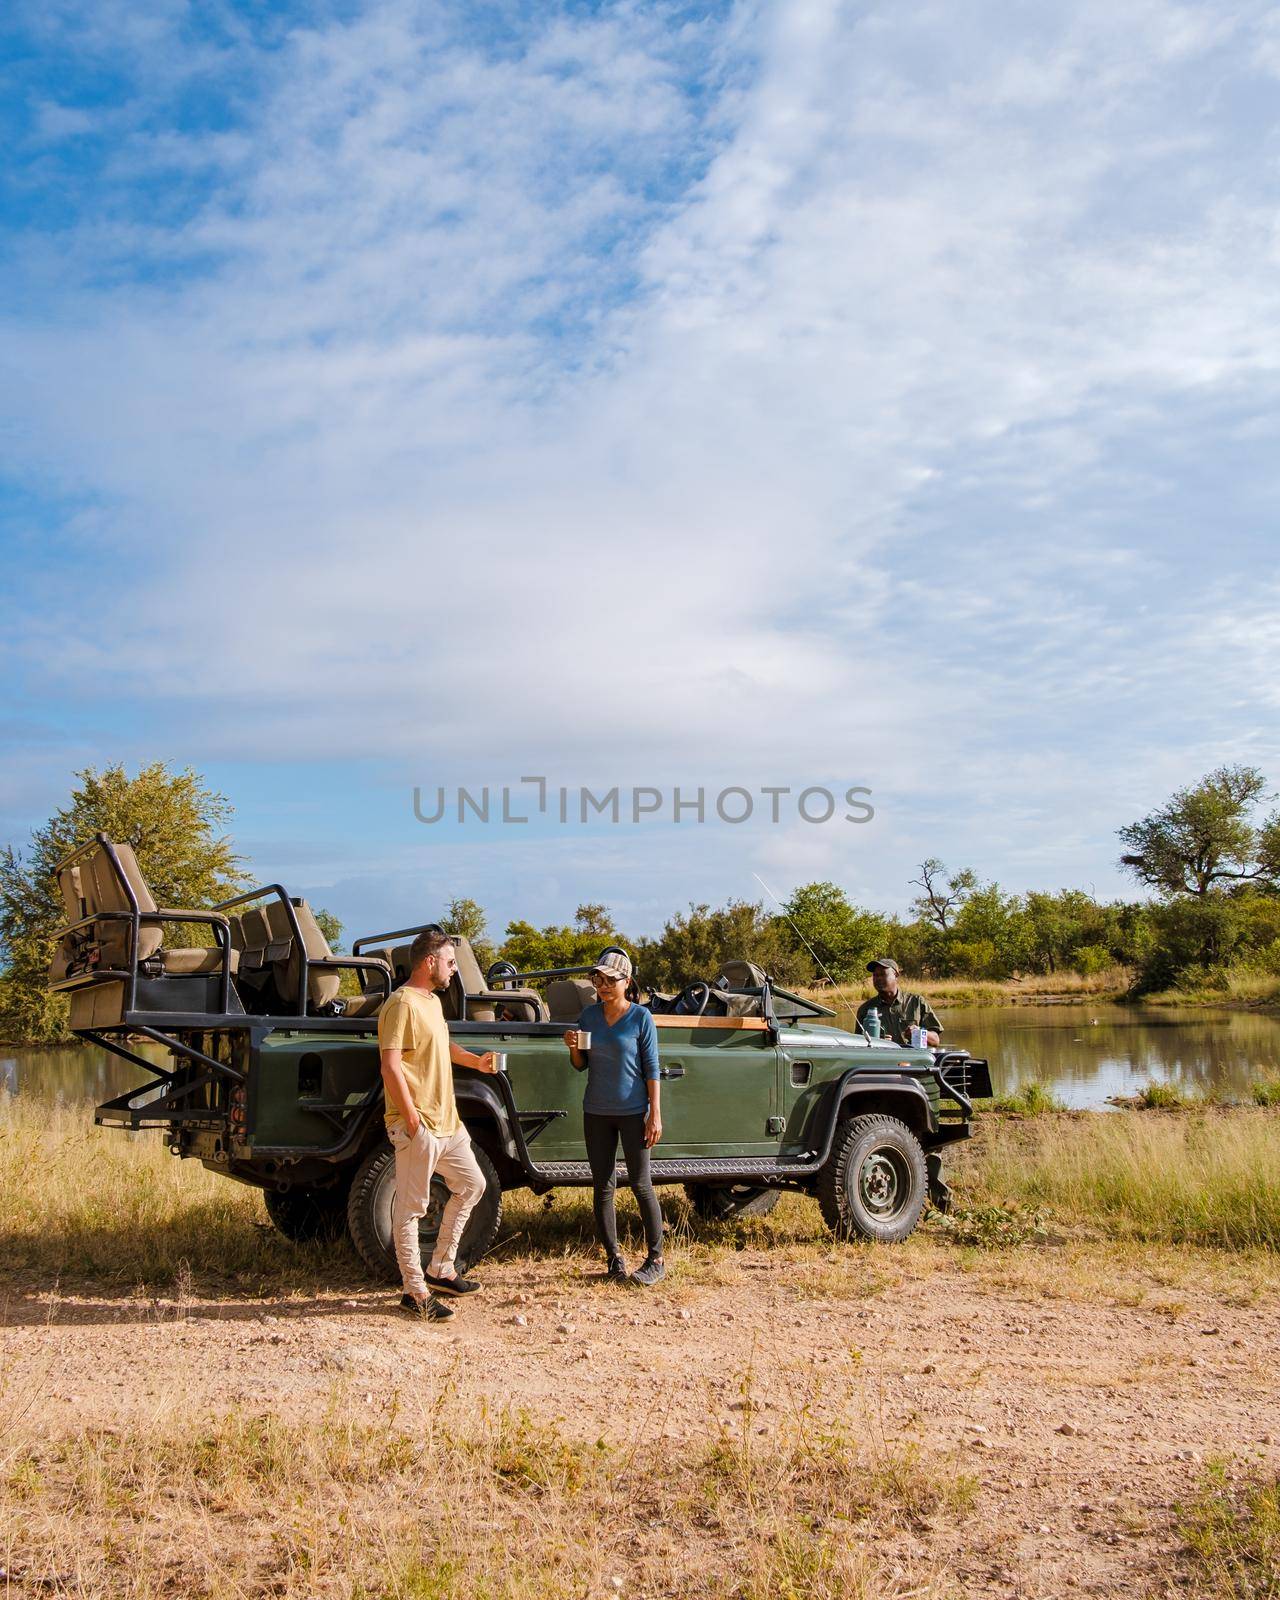 Asian women and European men on safari game drive in South Africa Kruger national park by fokkebok